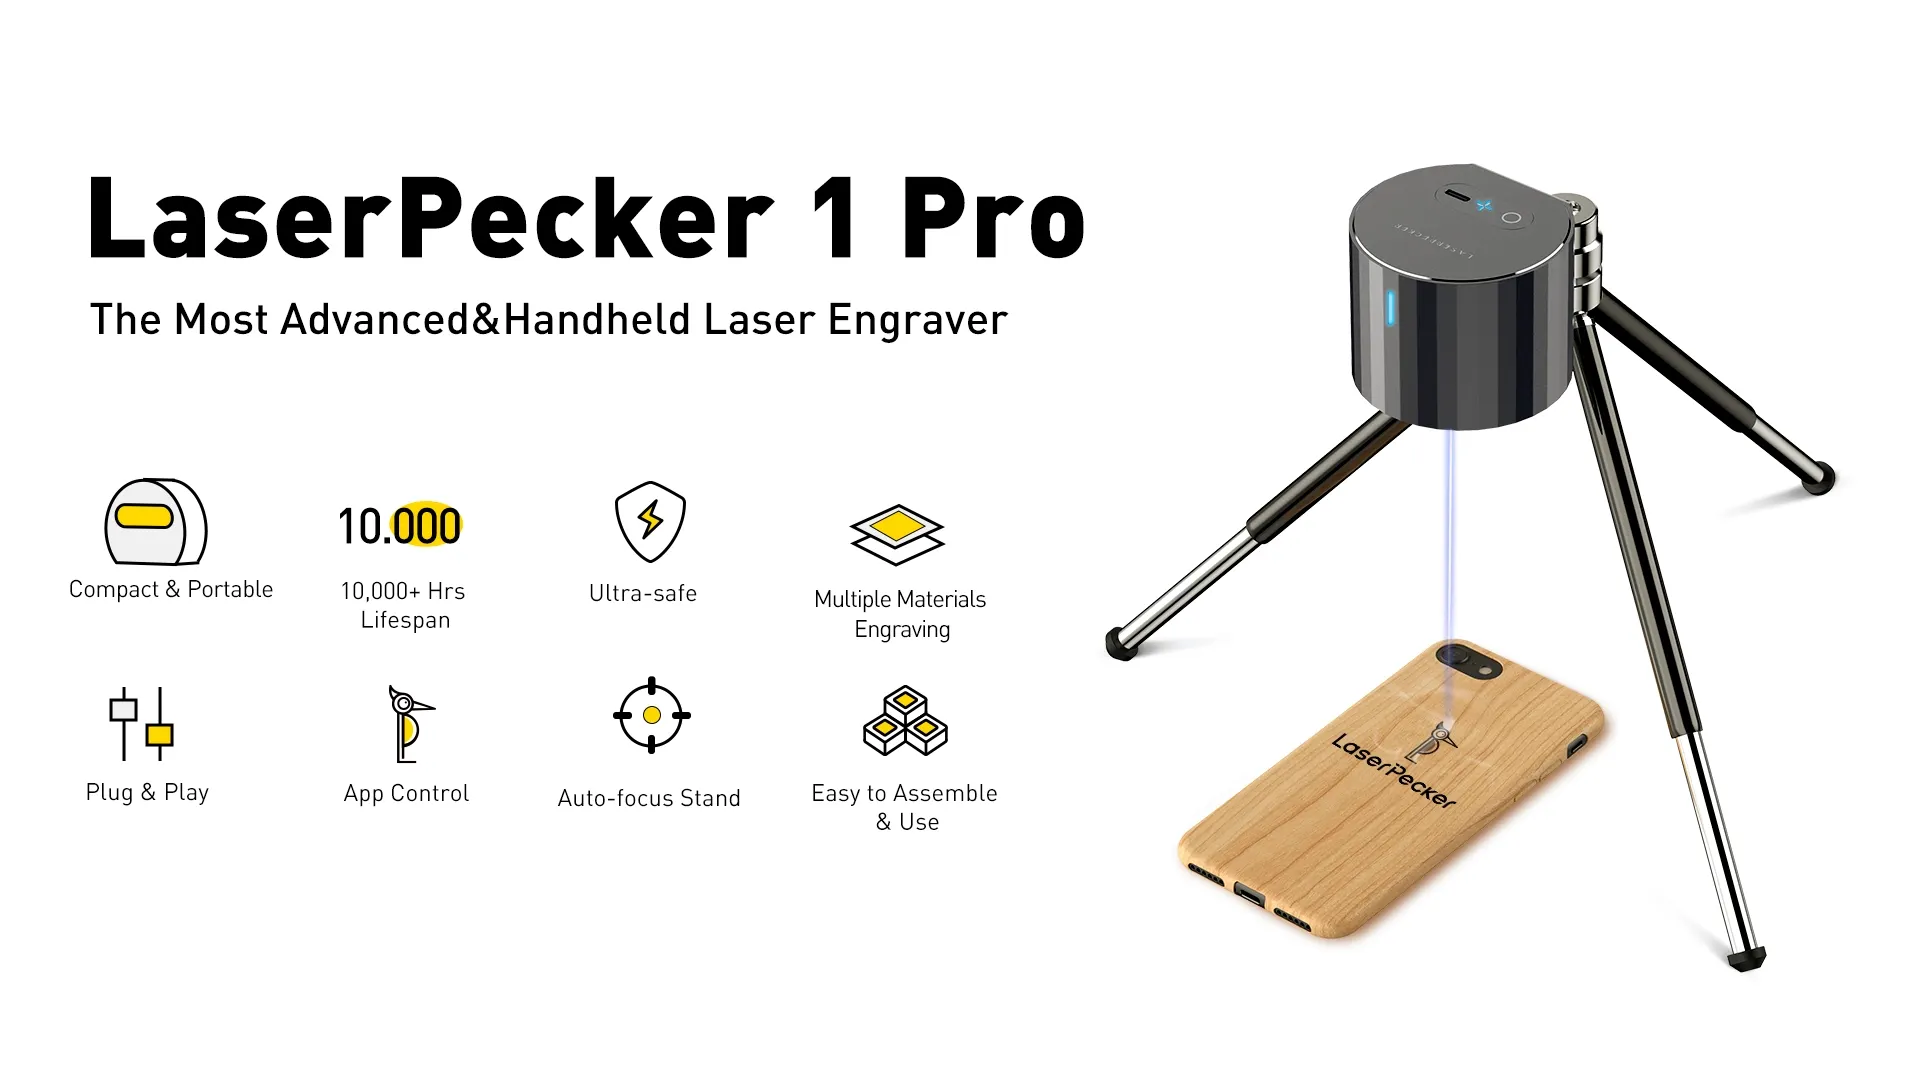 LaserPecker User Group, I'm new to the group and new to my laser